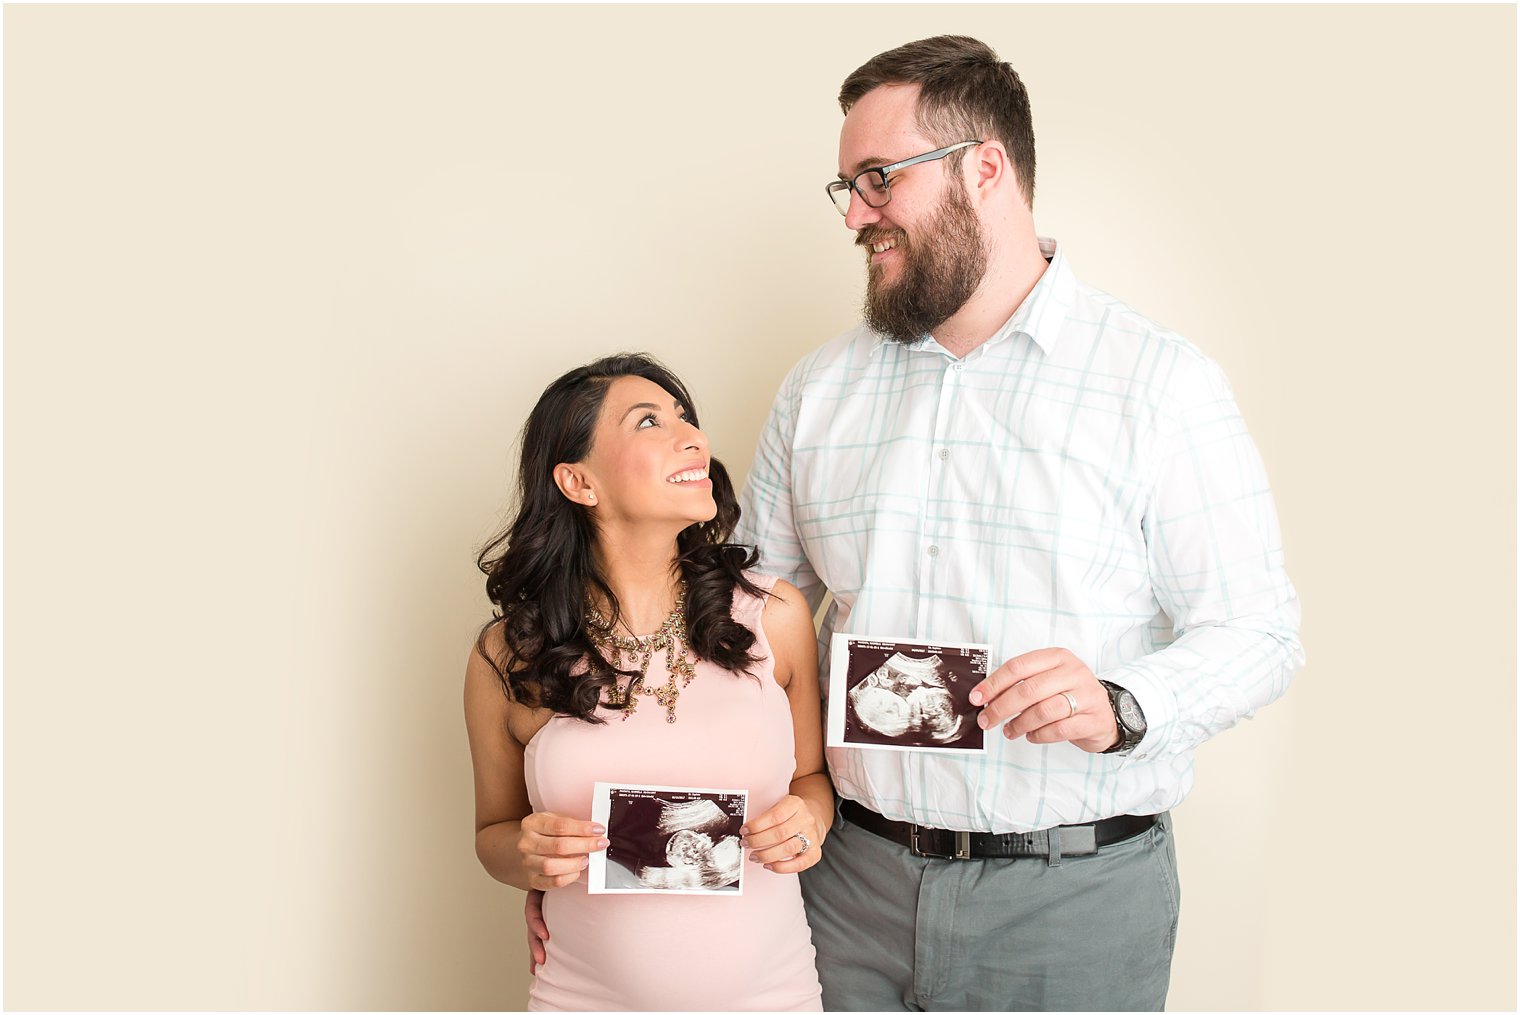 Ultrasound pose idea for pregnancy announcement | Photo by Idalia Photography